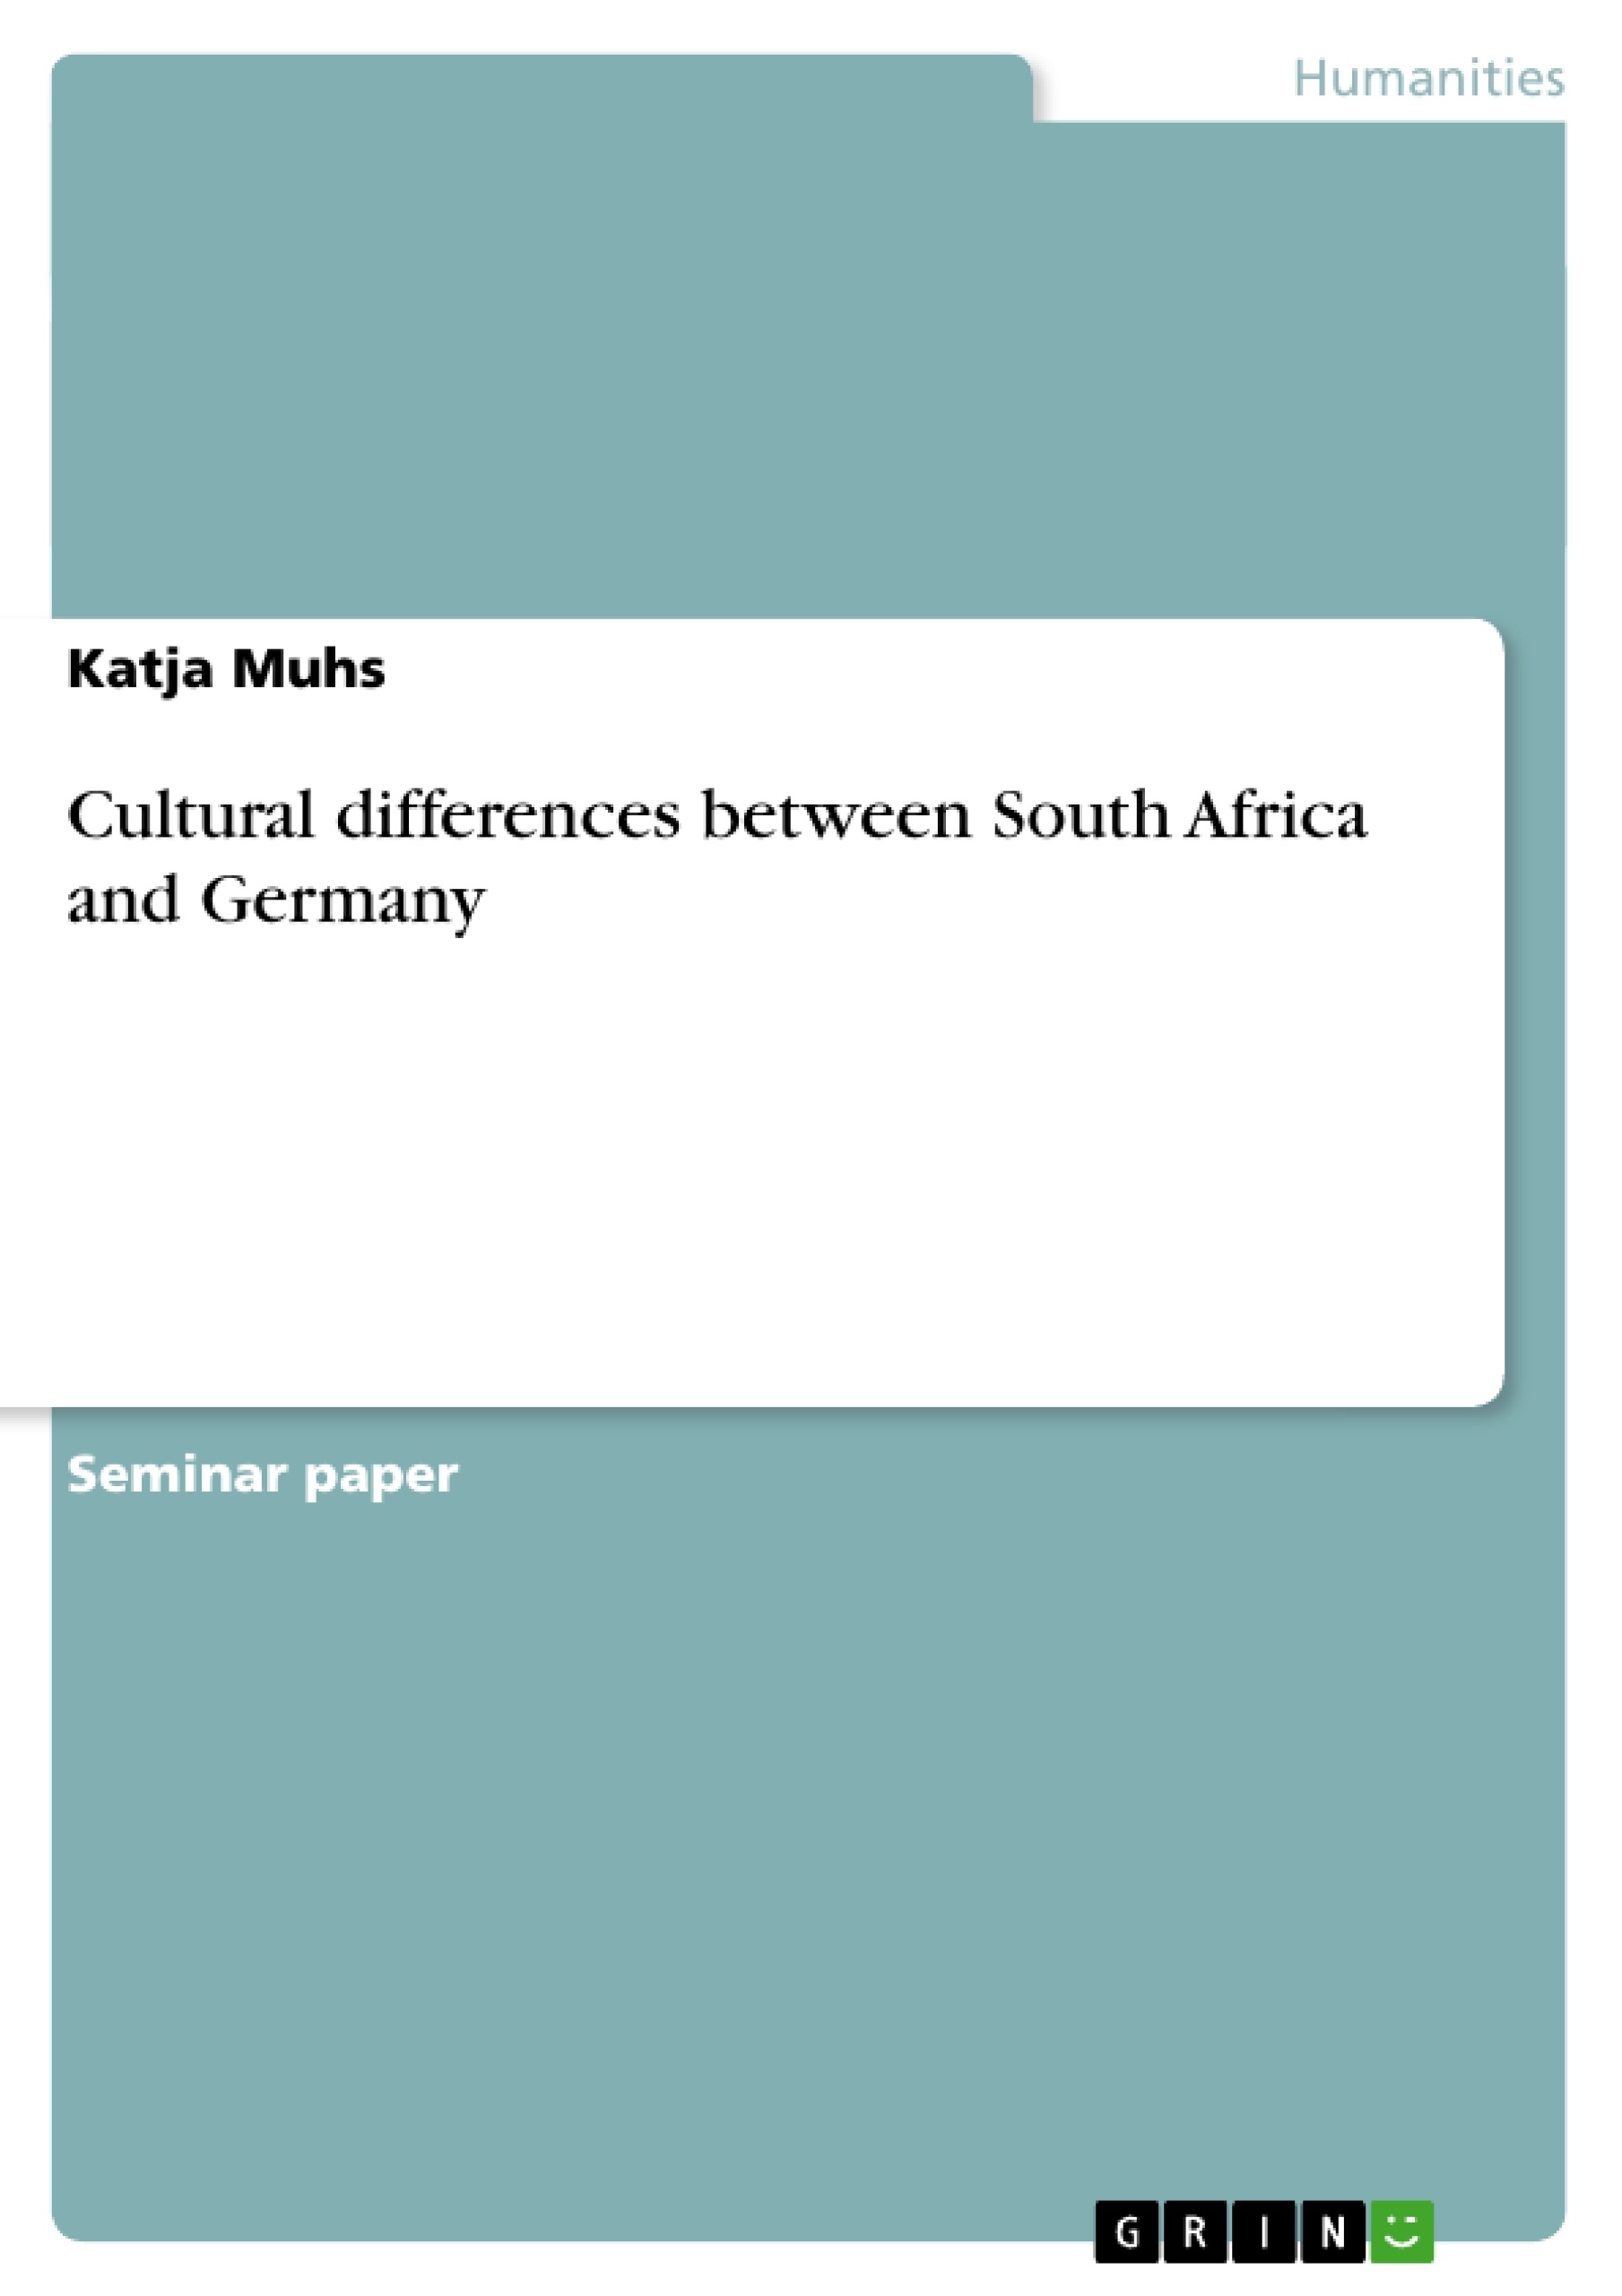 Titel: Cultural differences between South Africa and Germany